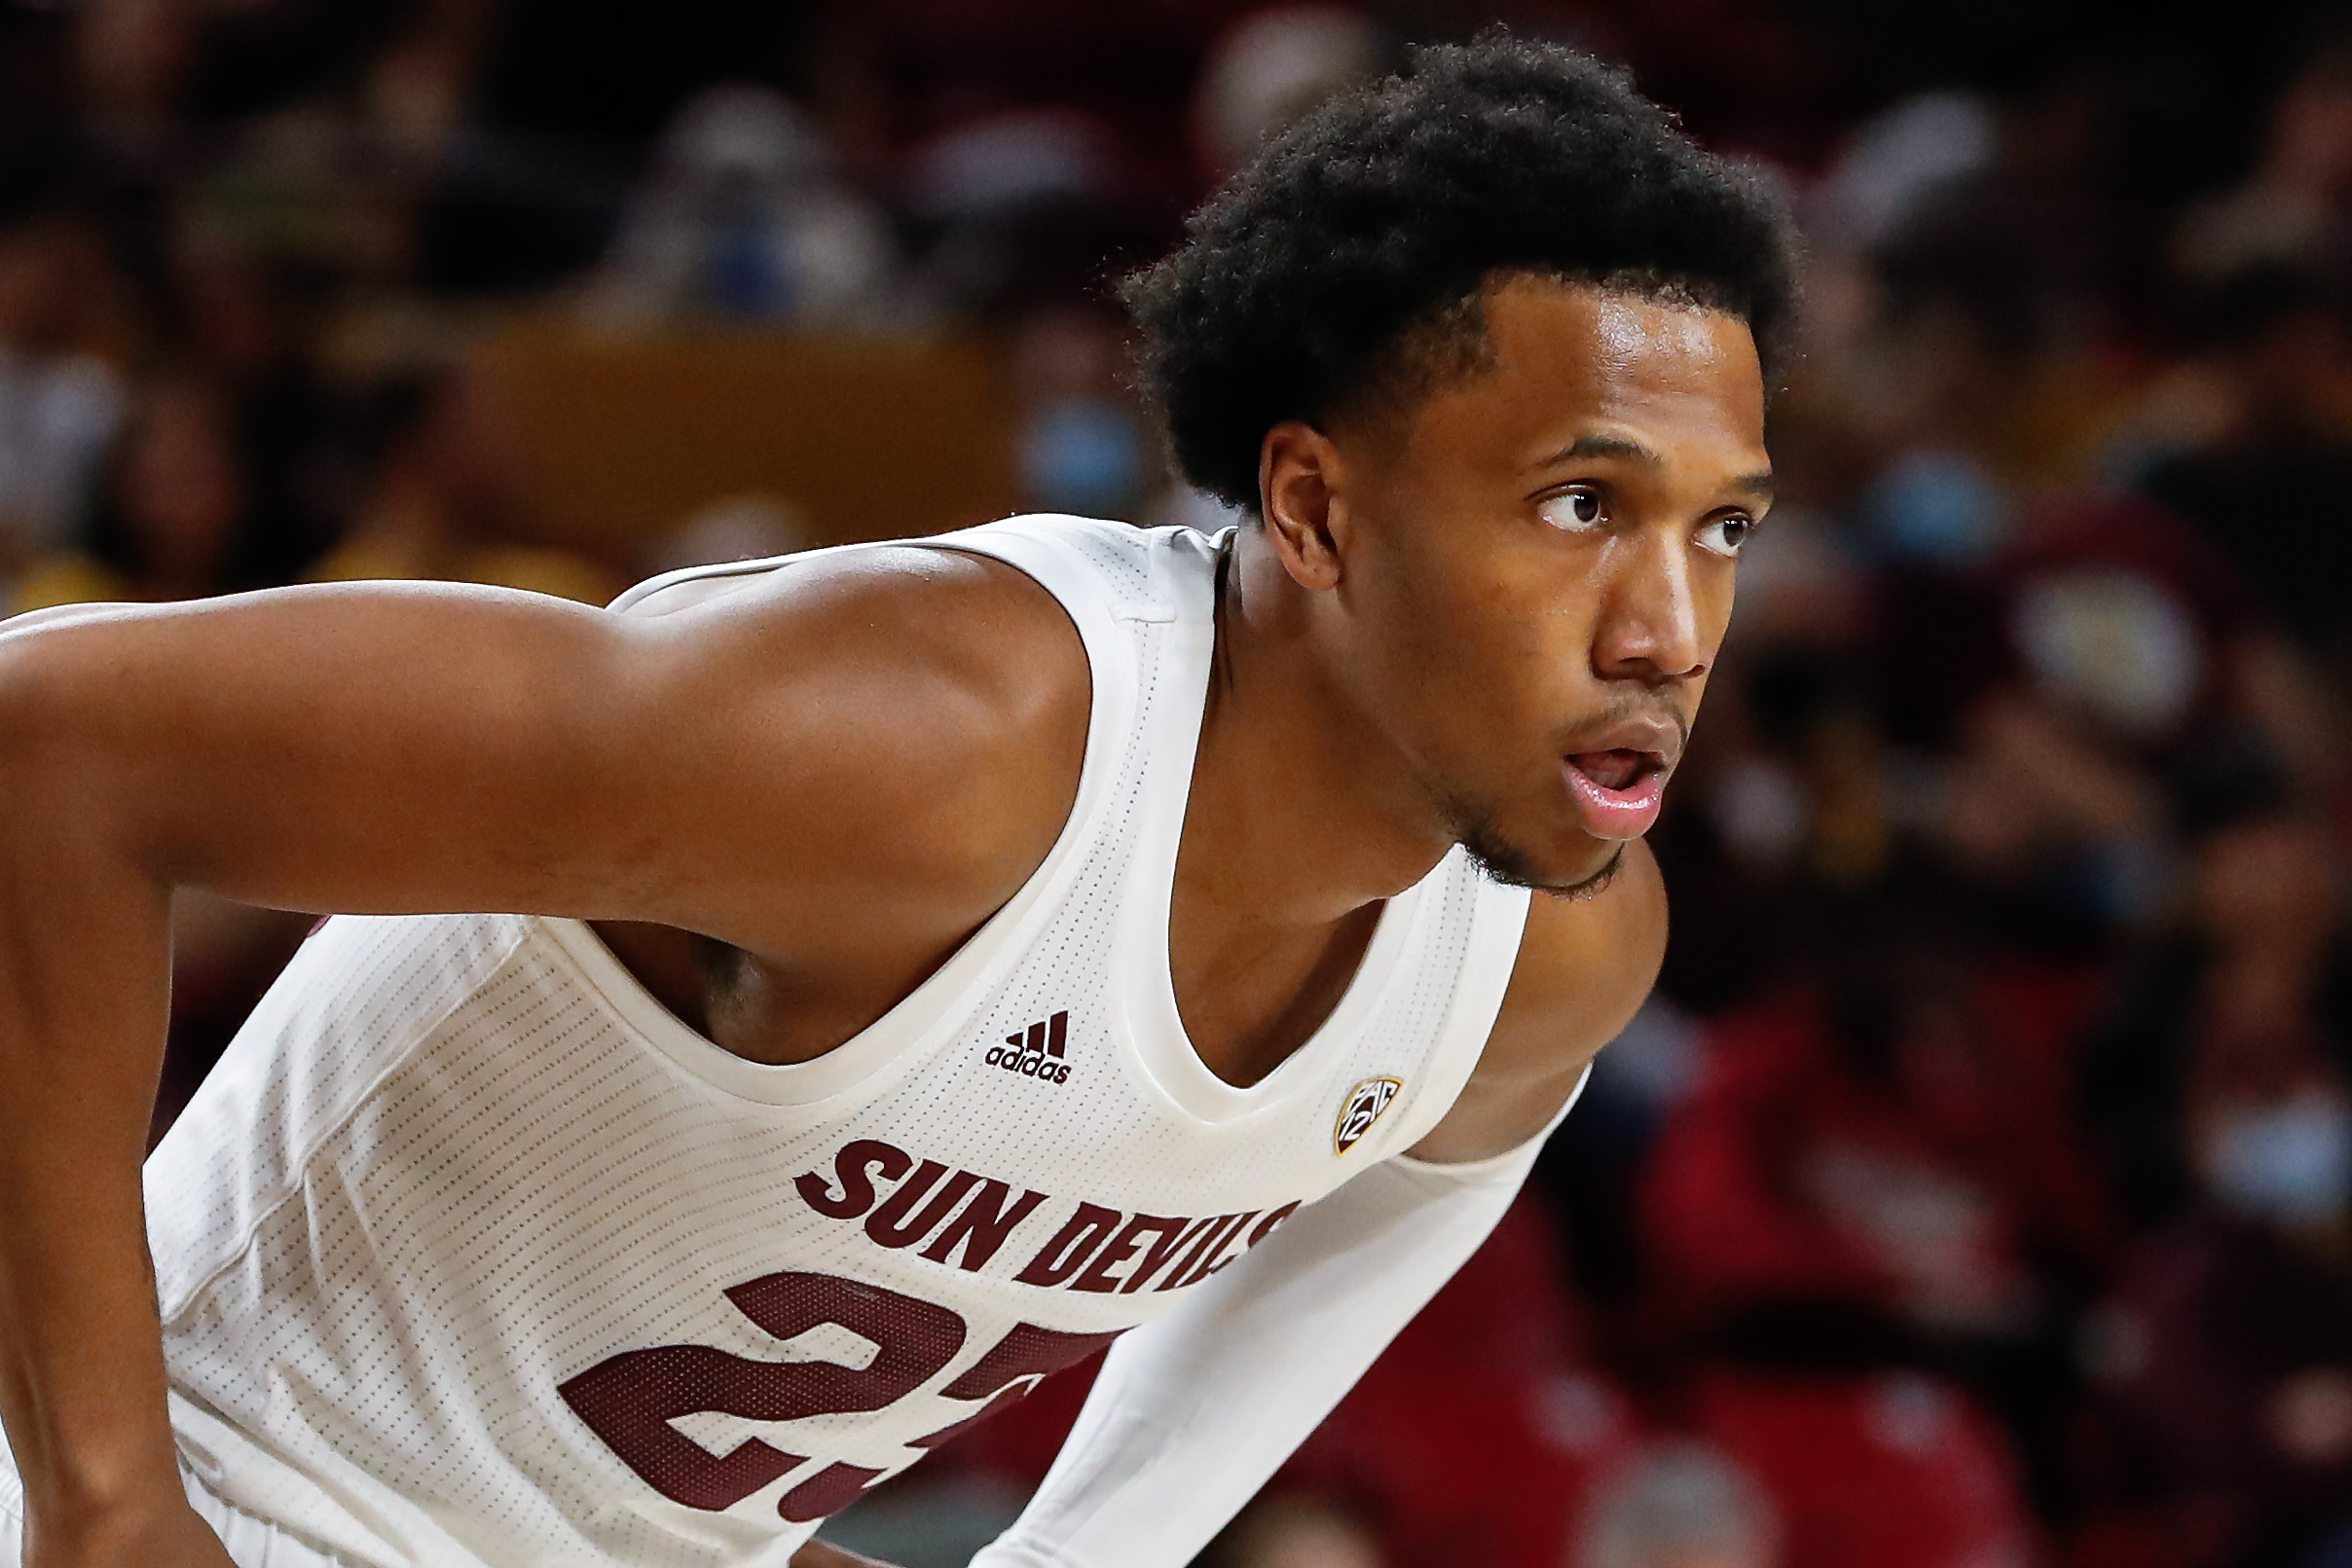 TEMPE, AZ - NOVEMBER 15: Arizona State Sun Devils forward Marcus Bagley (23) looks on during the college basketball game between the North Florida Ospreys and the Arizona State Sun Devils on November 15, 2021 at Desert Financial Arena in Tempe, Arizona.